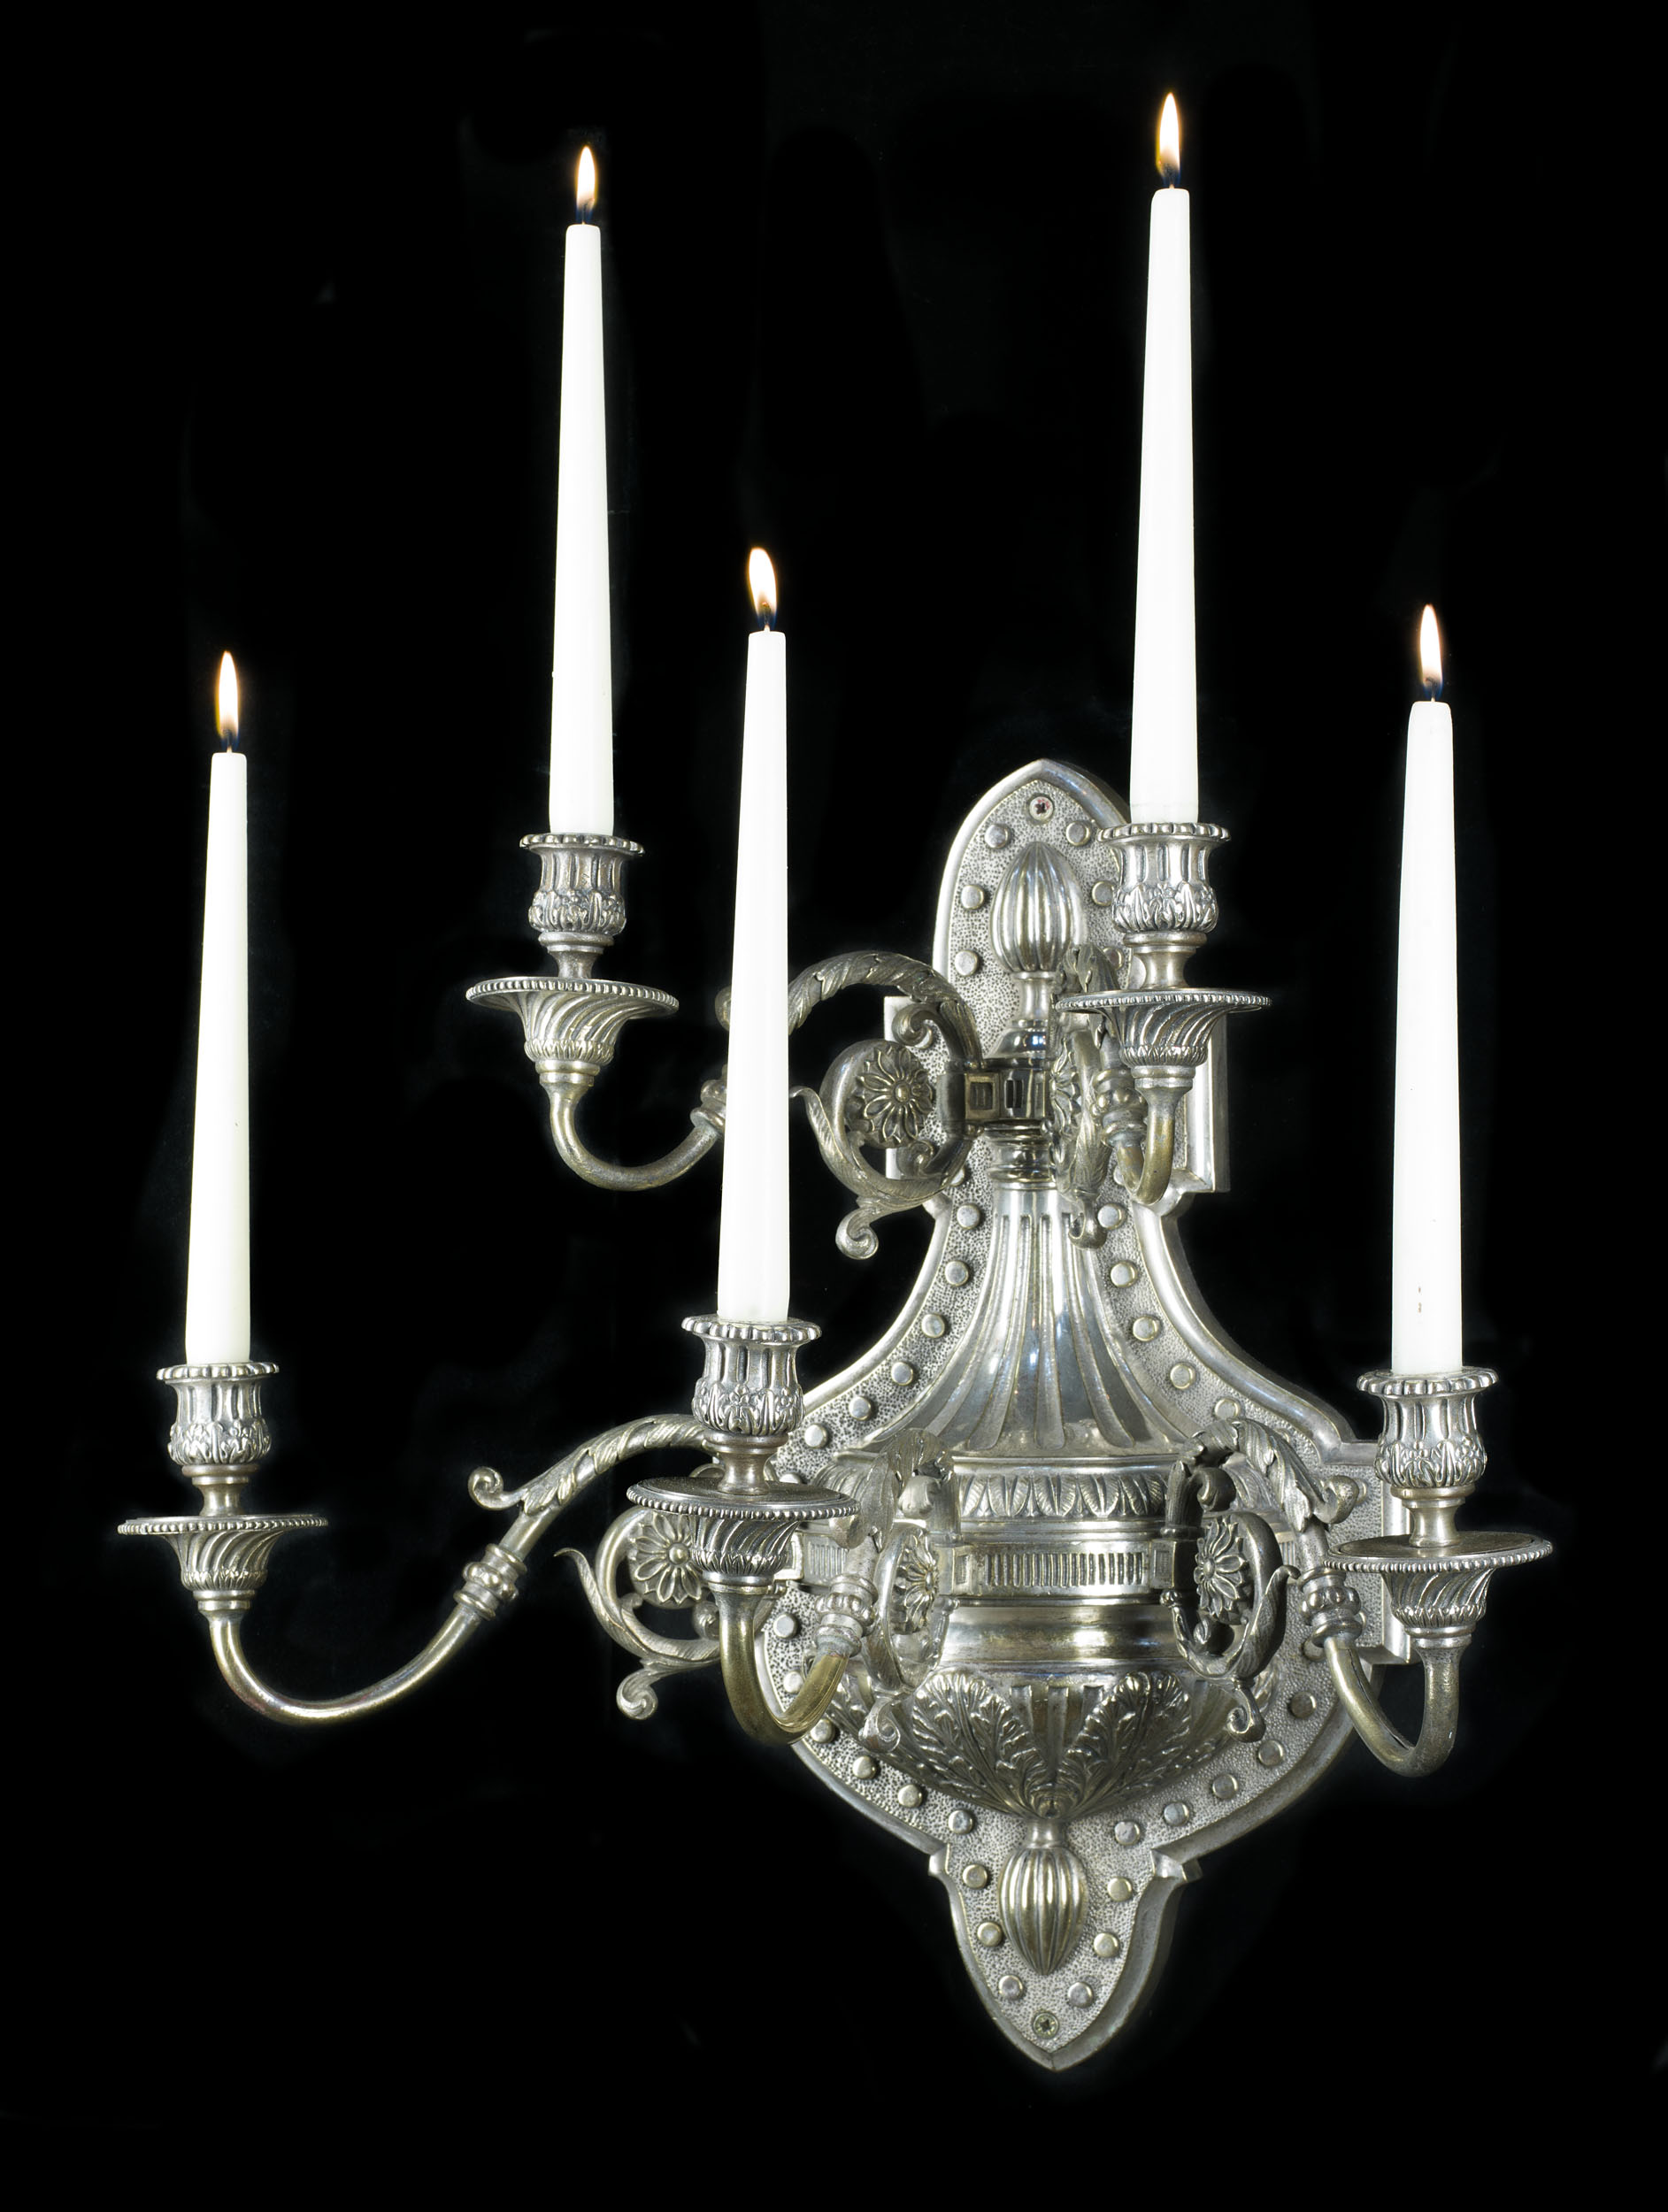 A Large Pair of Nickel Plated Wall Sconces